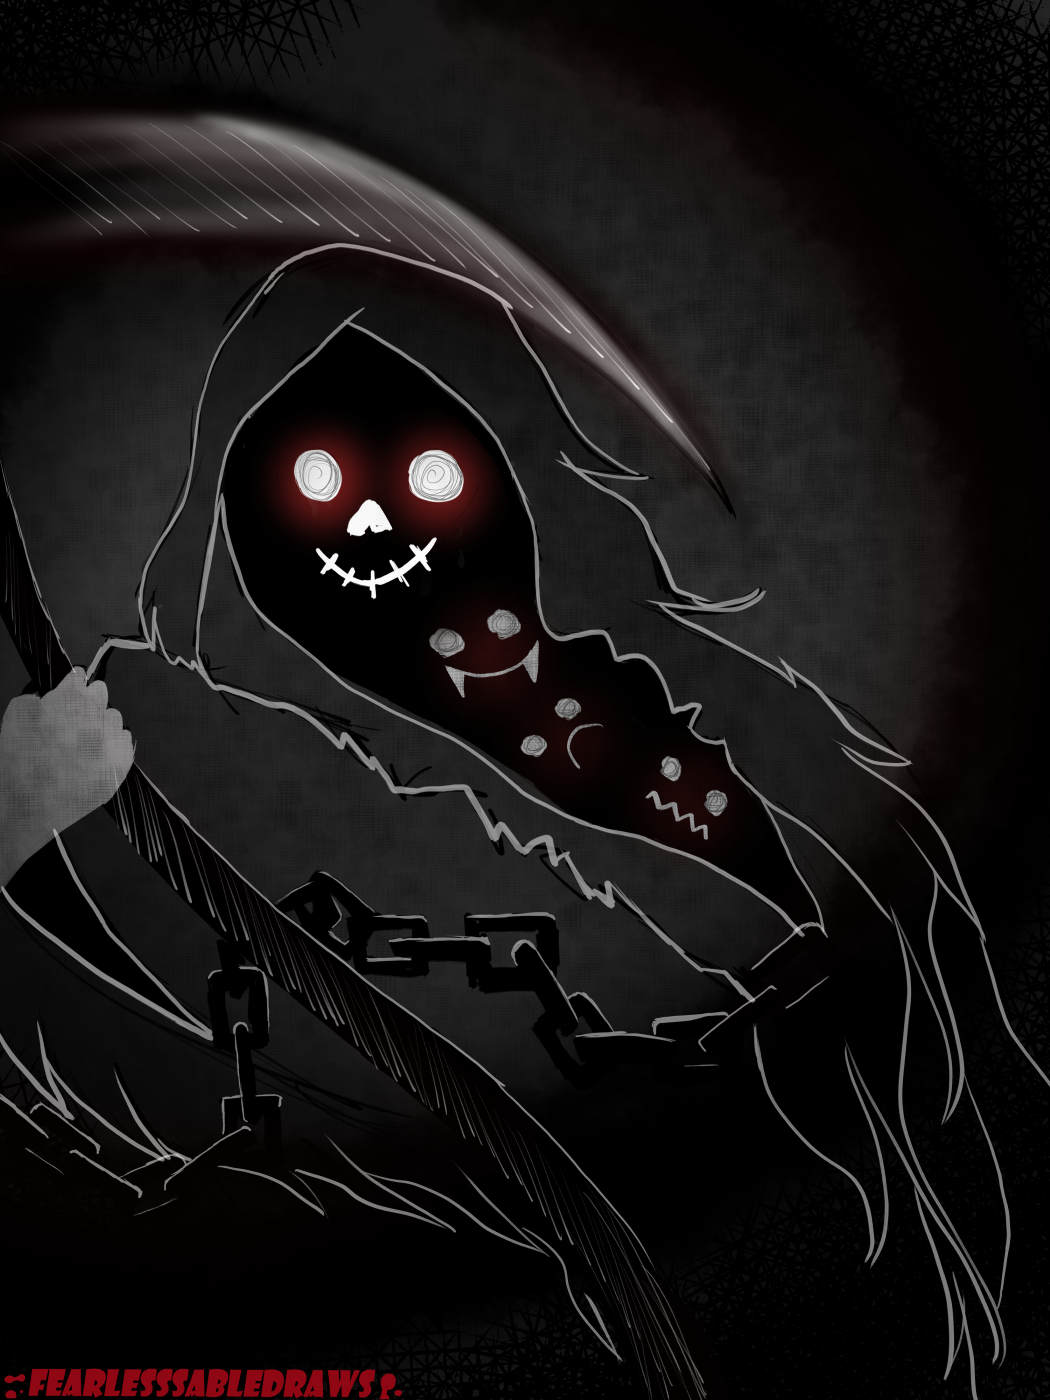 The Grim Reaper by FearlessSableDraws on DeviantArt